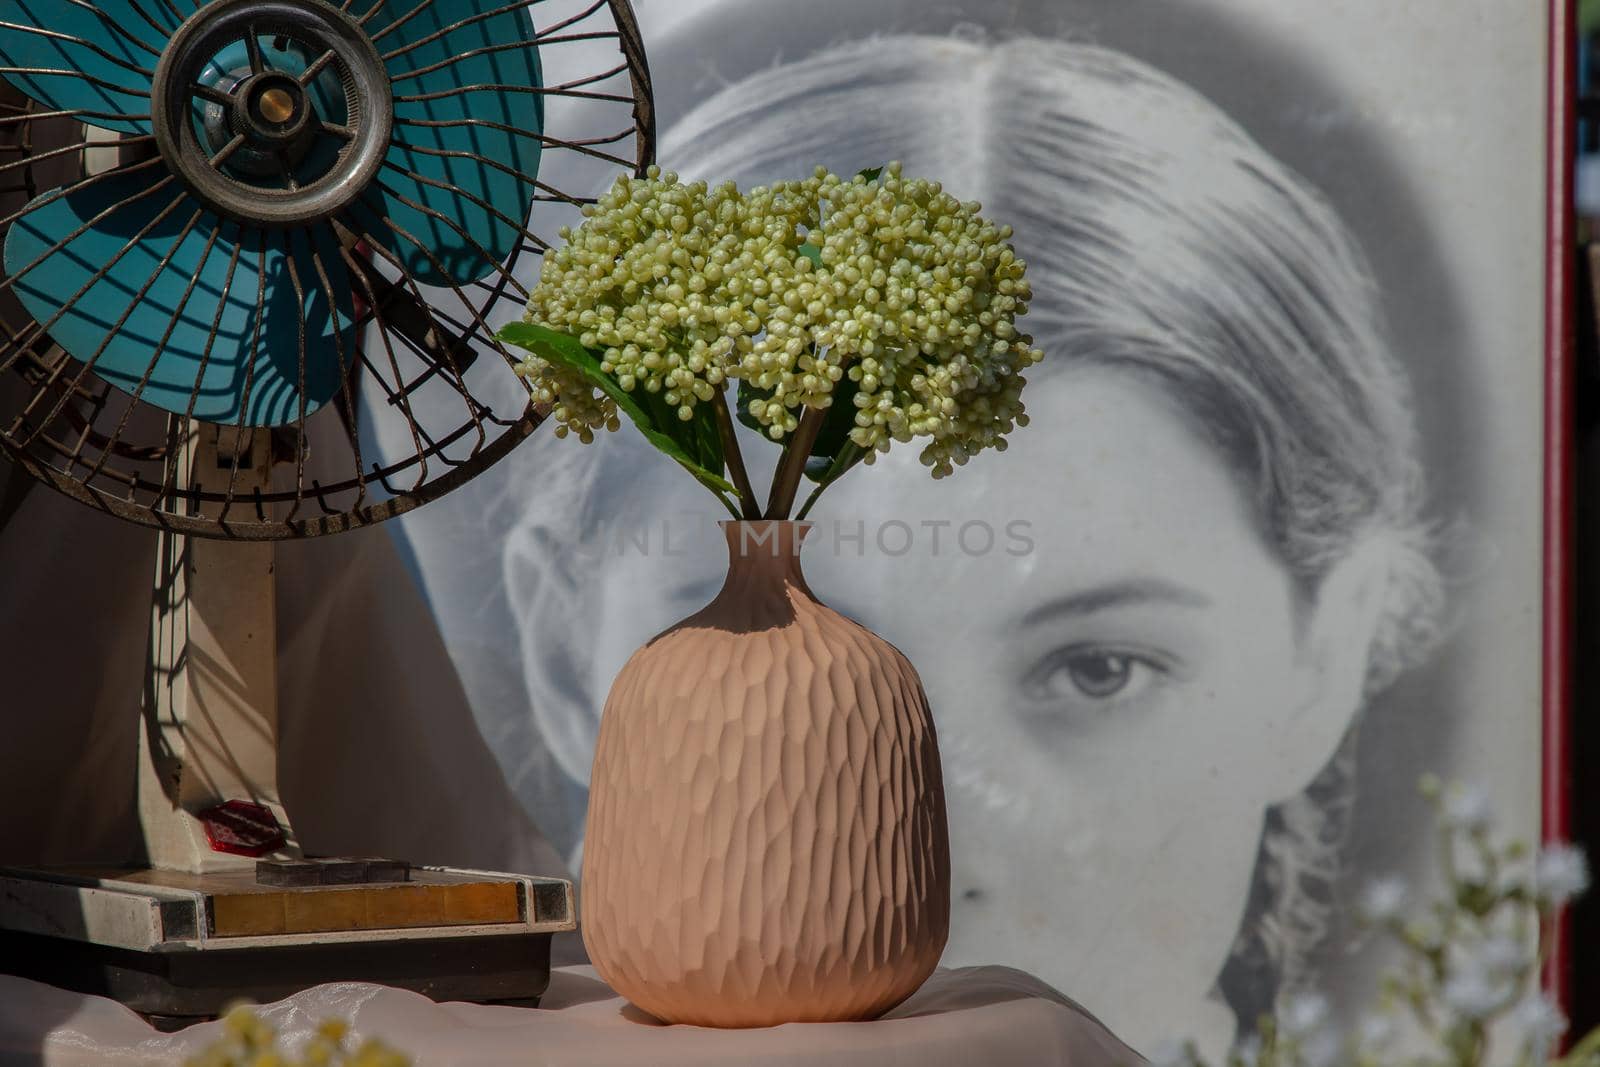 Bangkok, Thailand - Feb 06, 2021: Bouquet of green flowers in Handmade ceramic vase and old vintage fan on pink textured table cloth in front of Classic chinese poster movie frame. Home decor, Selective focus.